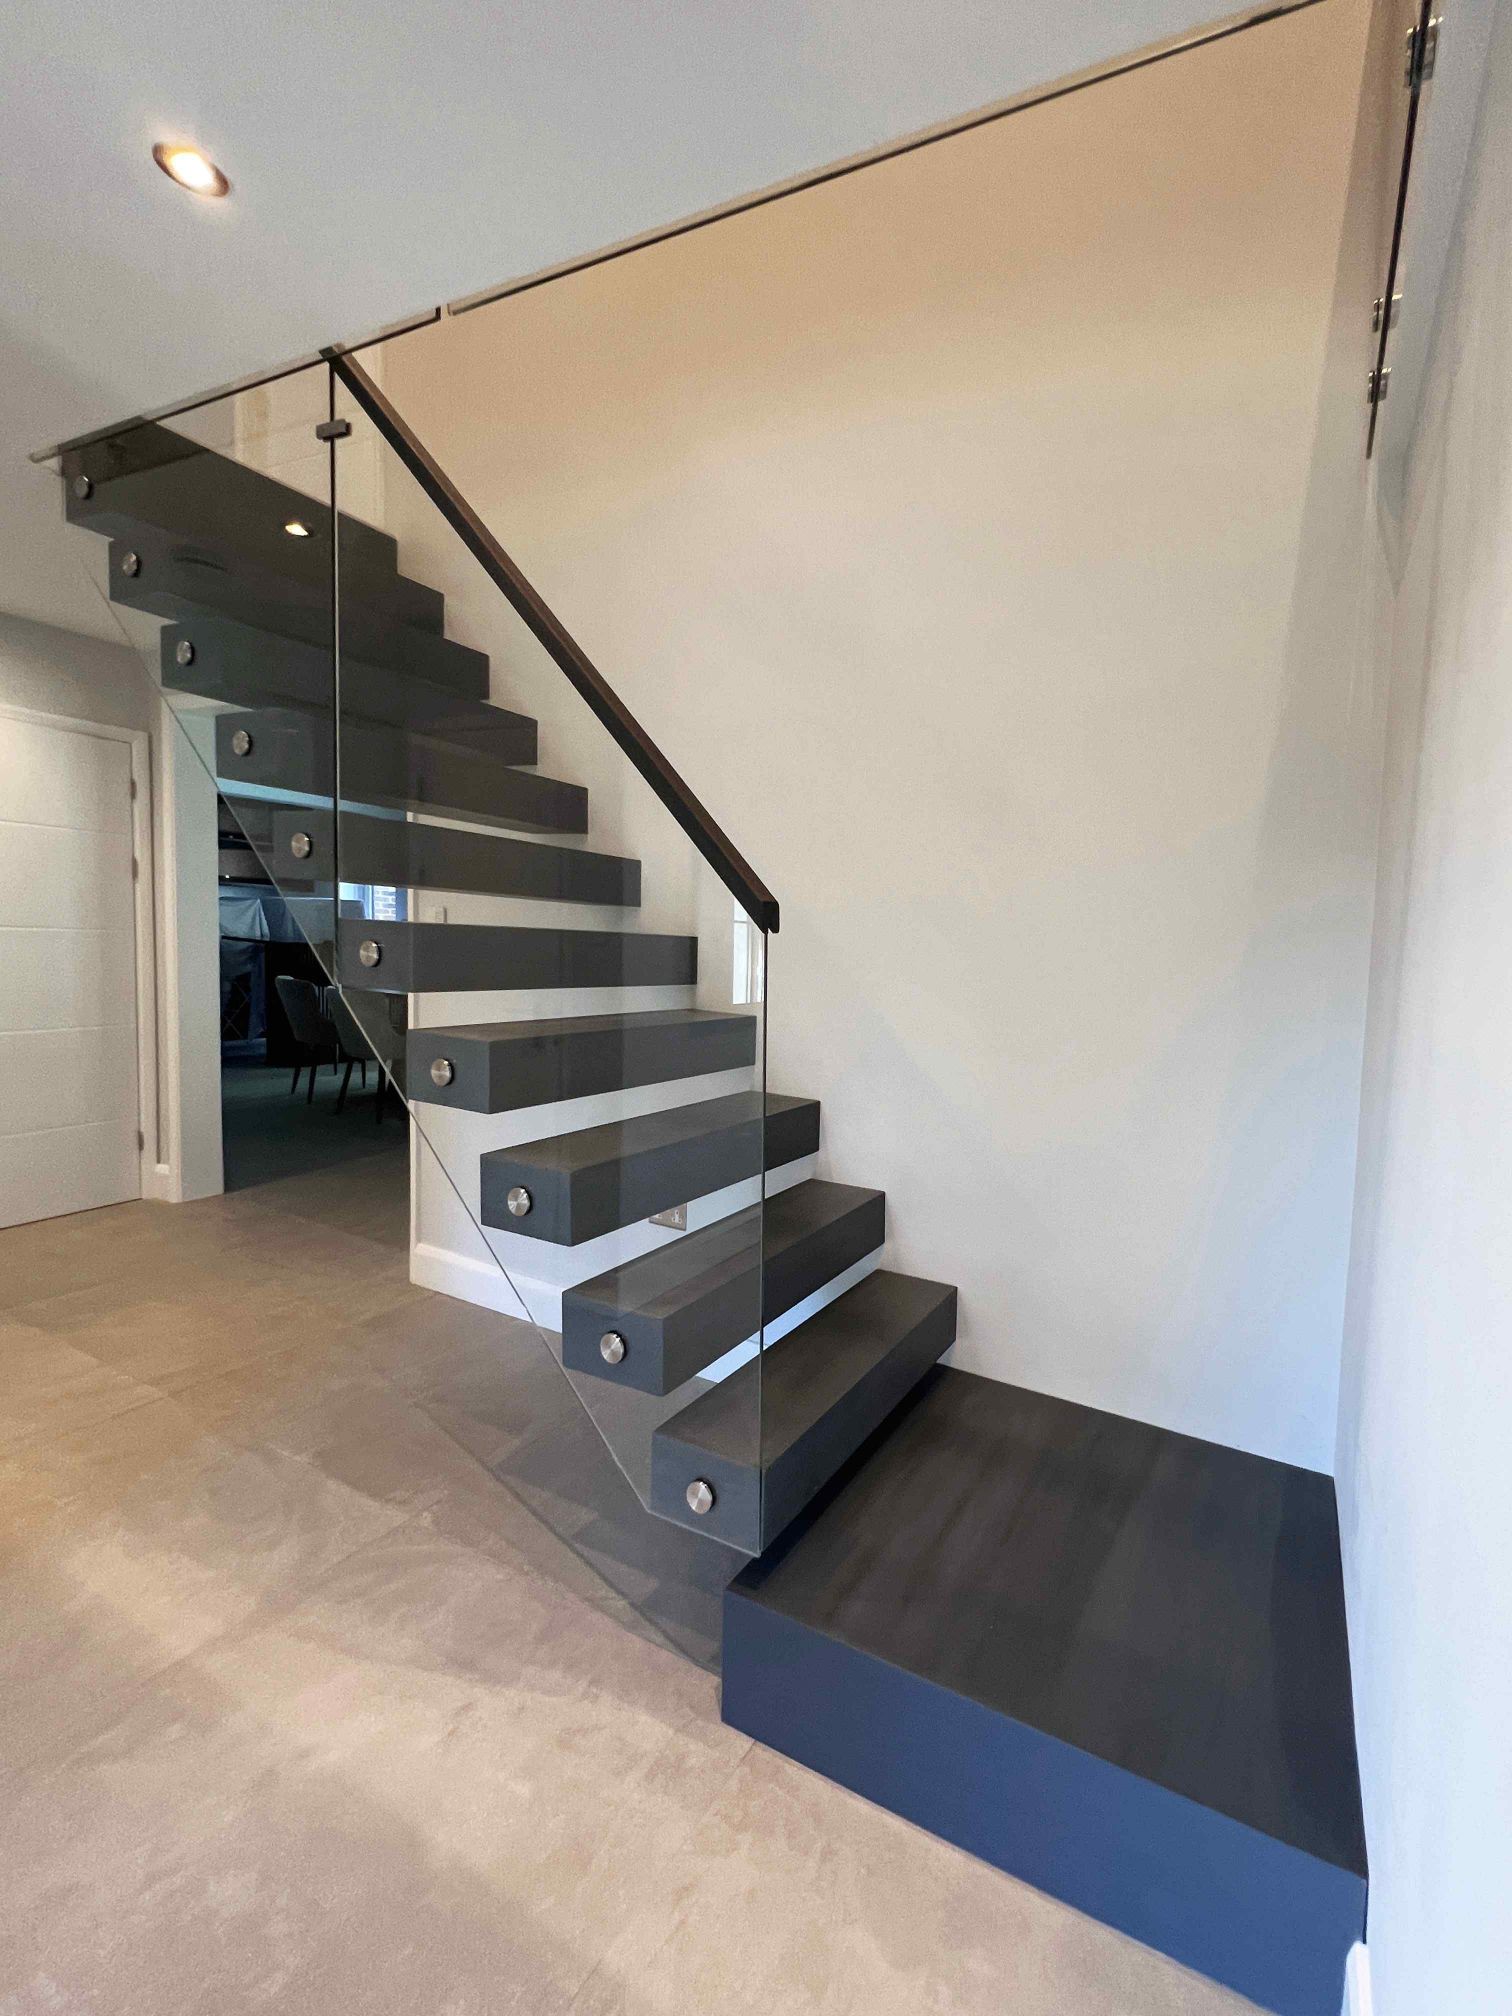 Bespoke floating staircase with glass balustrade